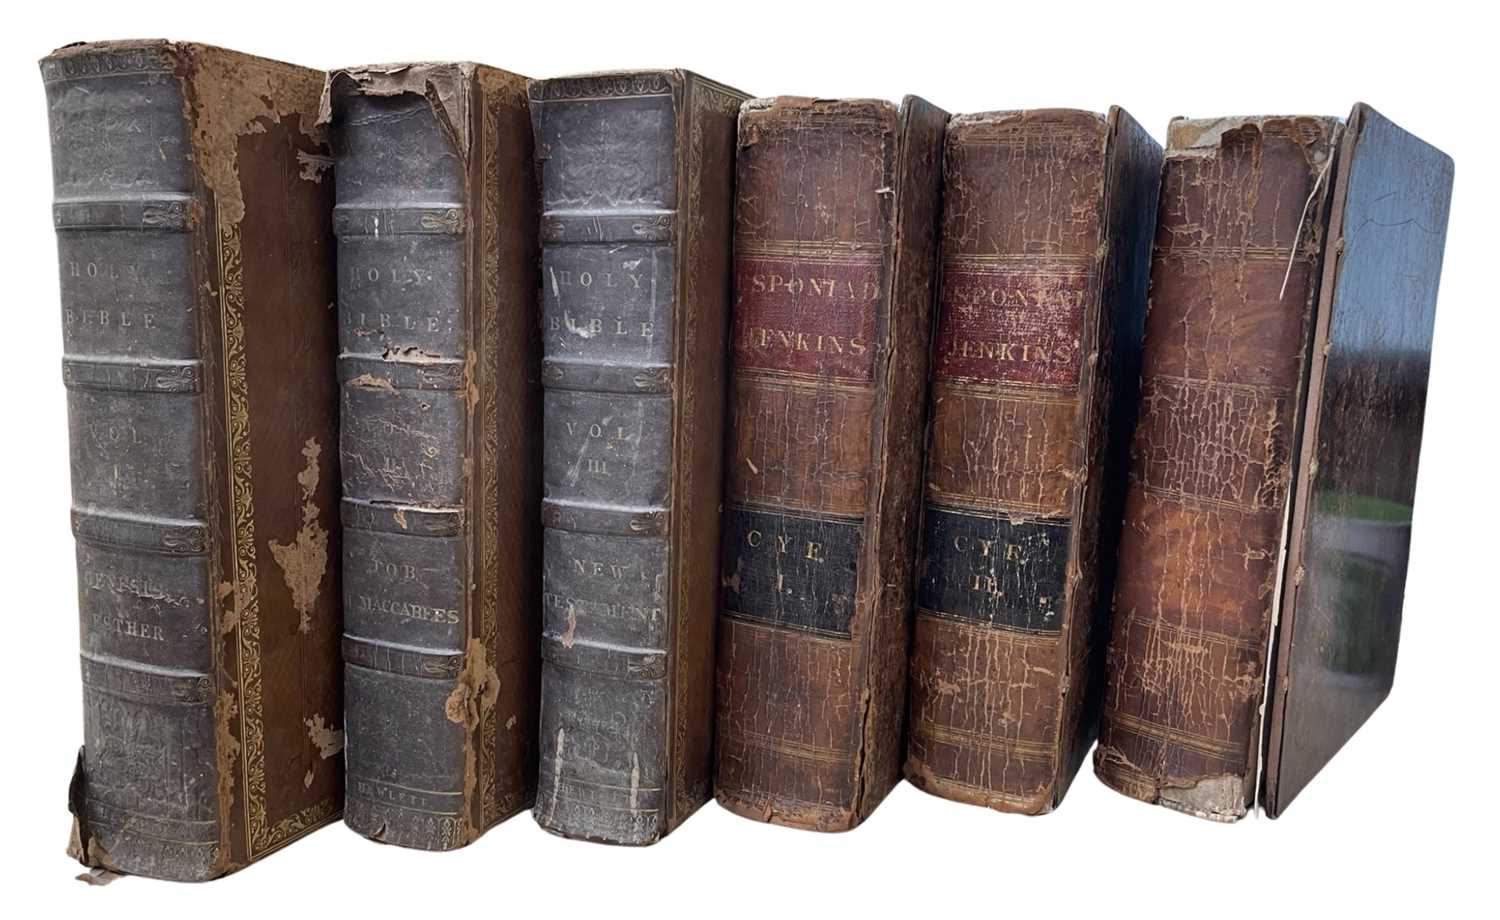 ANTIQUARIAN BIBLES: A pair of 3 volume sets in English and Welsh, respectively. Period calf